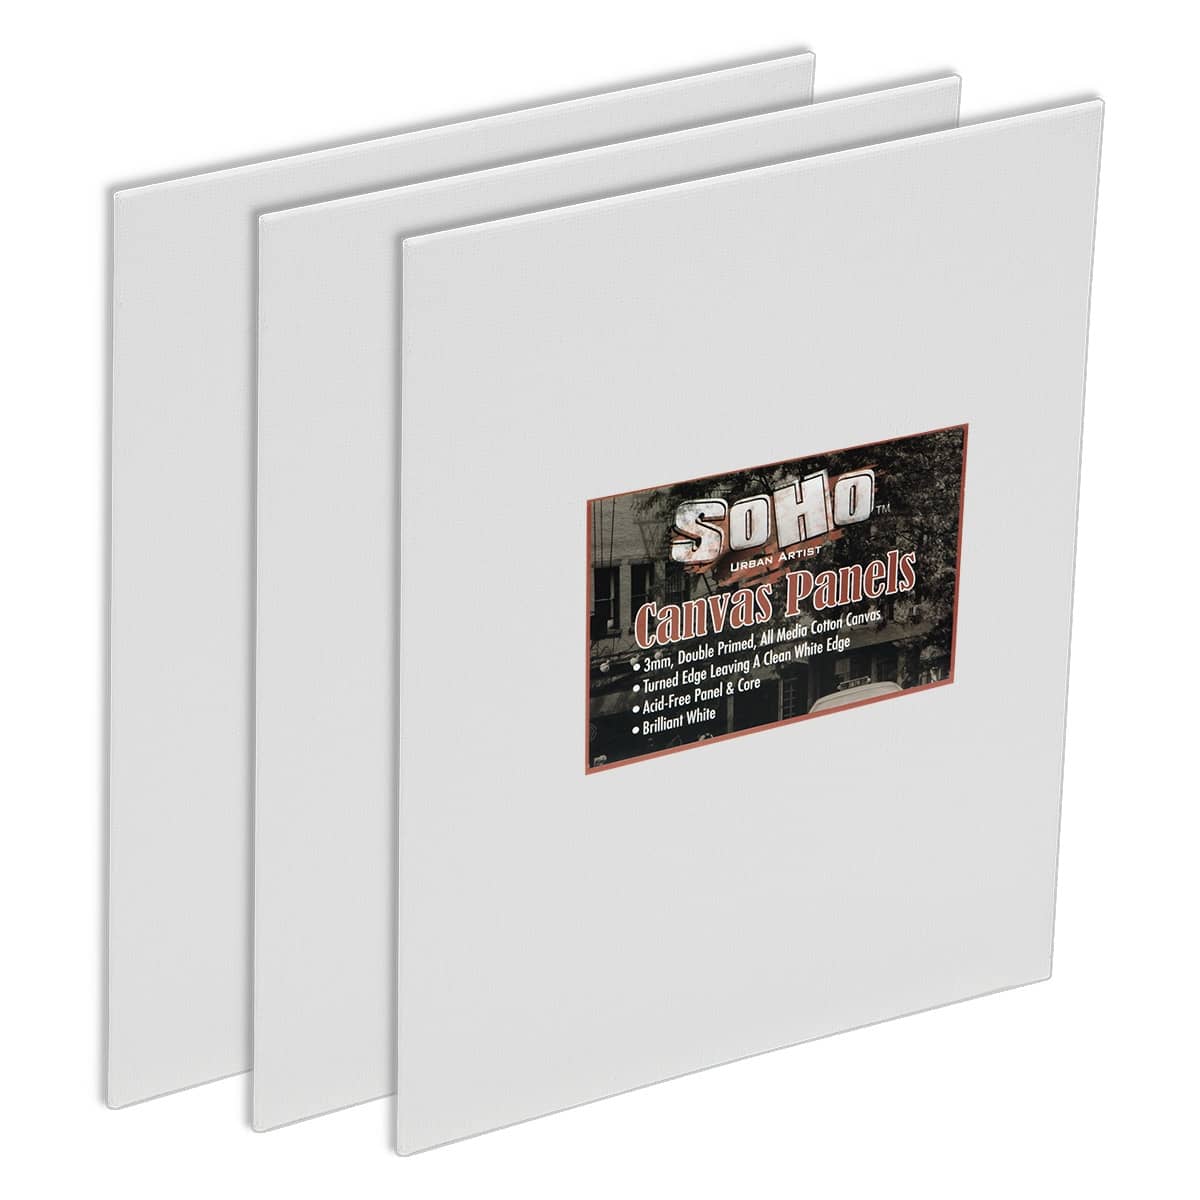 Gesso Panel 1/8'' (Temp) 5x7 - 6 pack - MICA Store